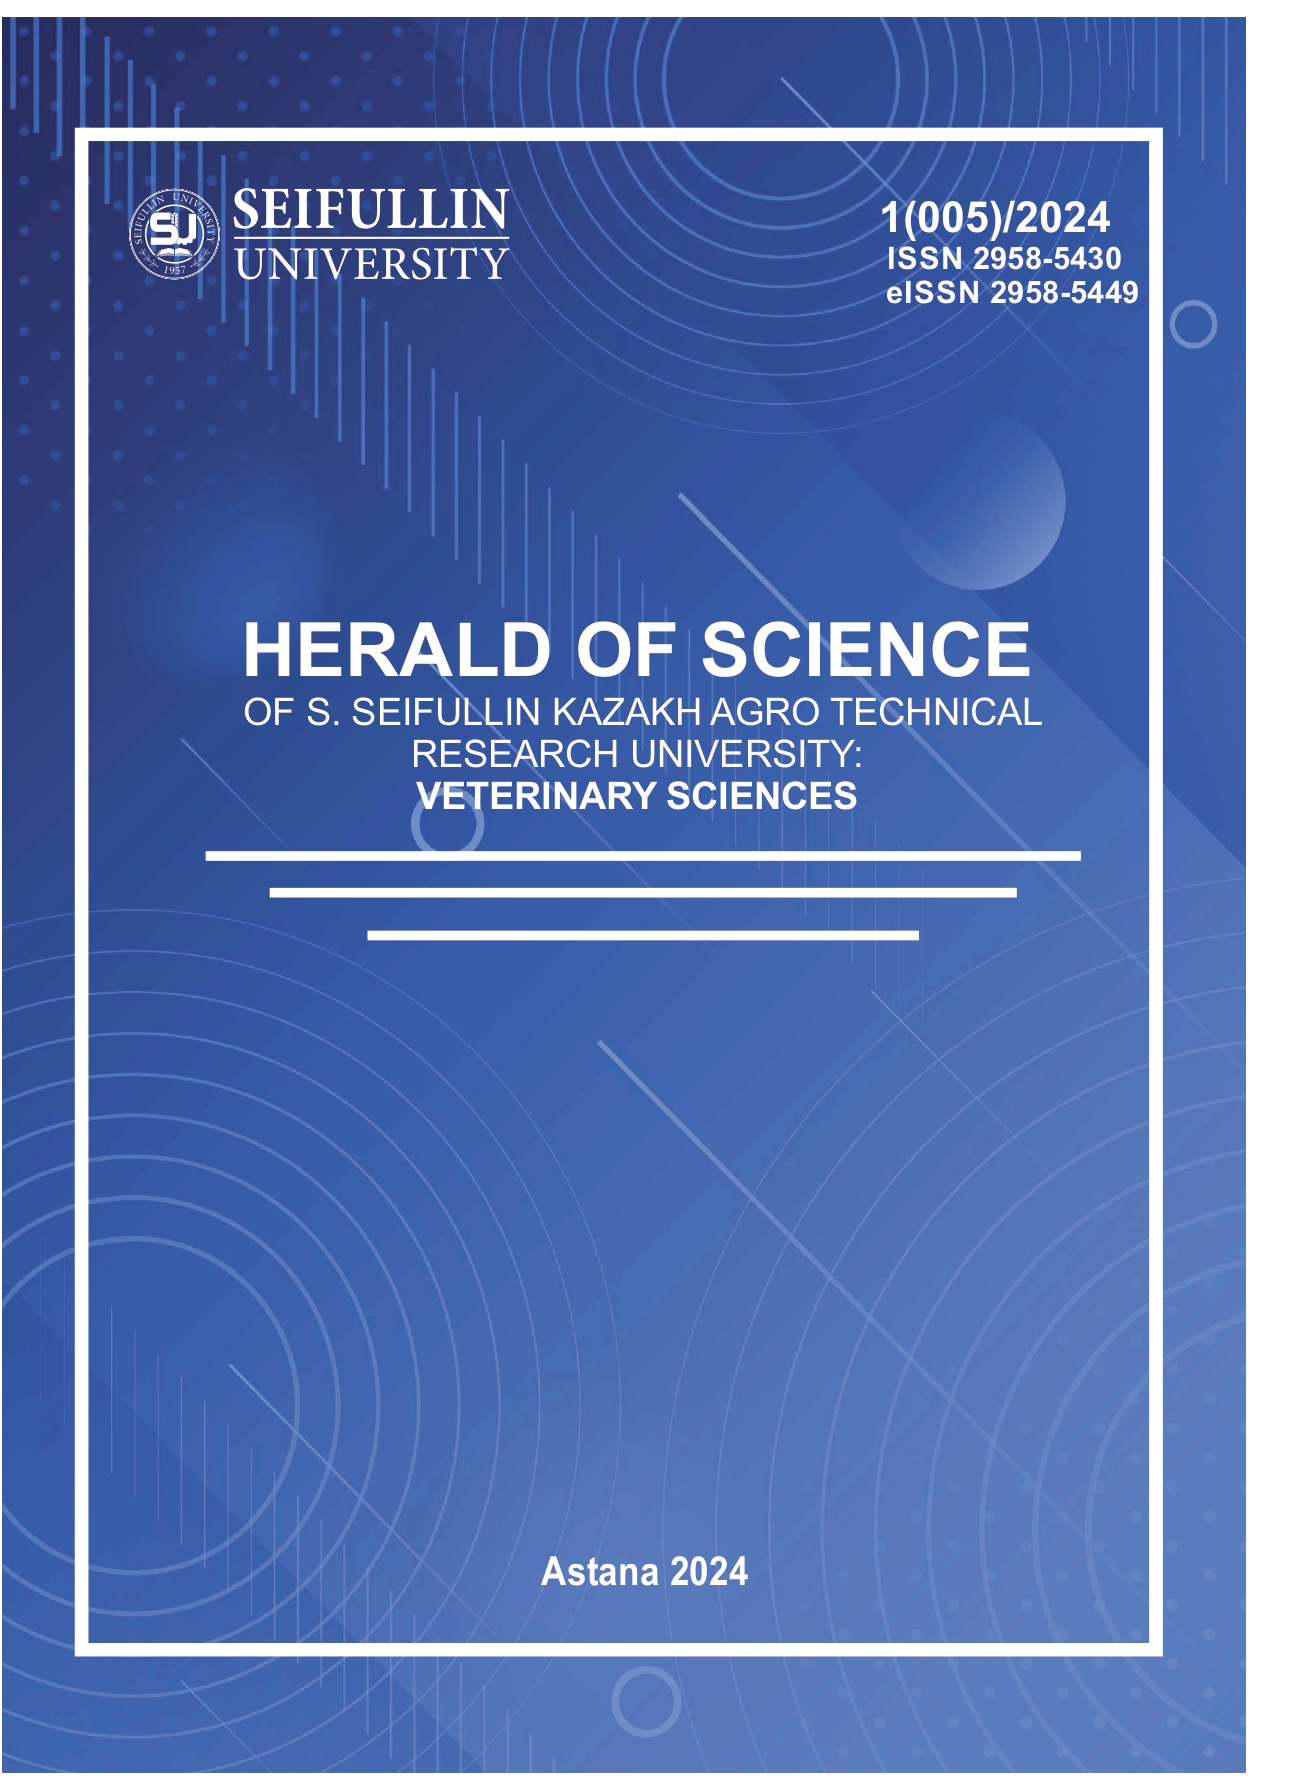 					View No. 1(005) (2024): HERALD OF SCIENCE OF S SEIFULLIN KAZAKH AGRO TECHNICAL RESEARCH UNIVERSITY: Veterinary sciences
				